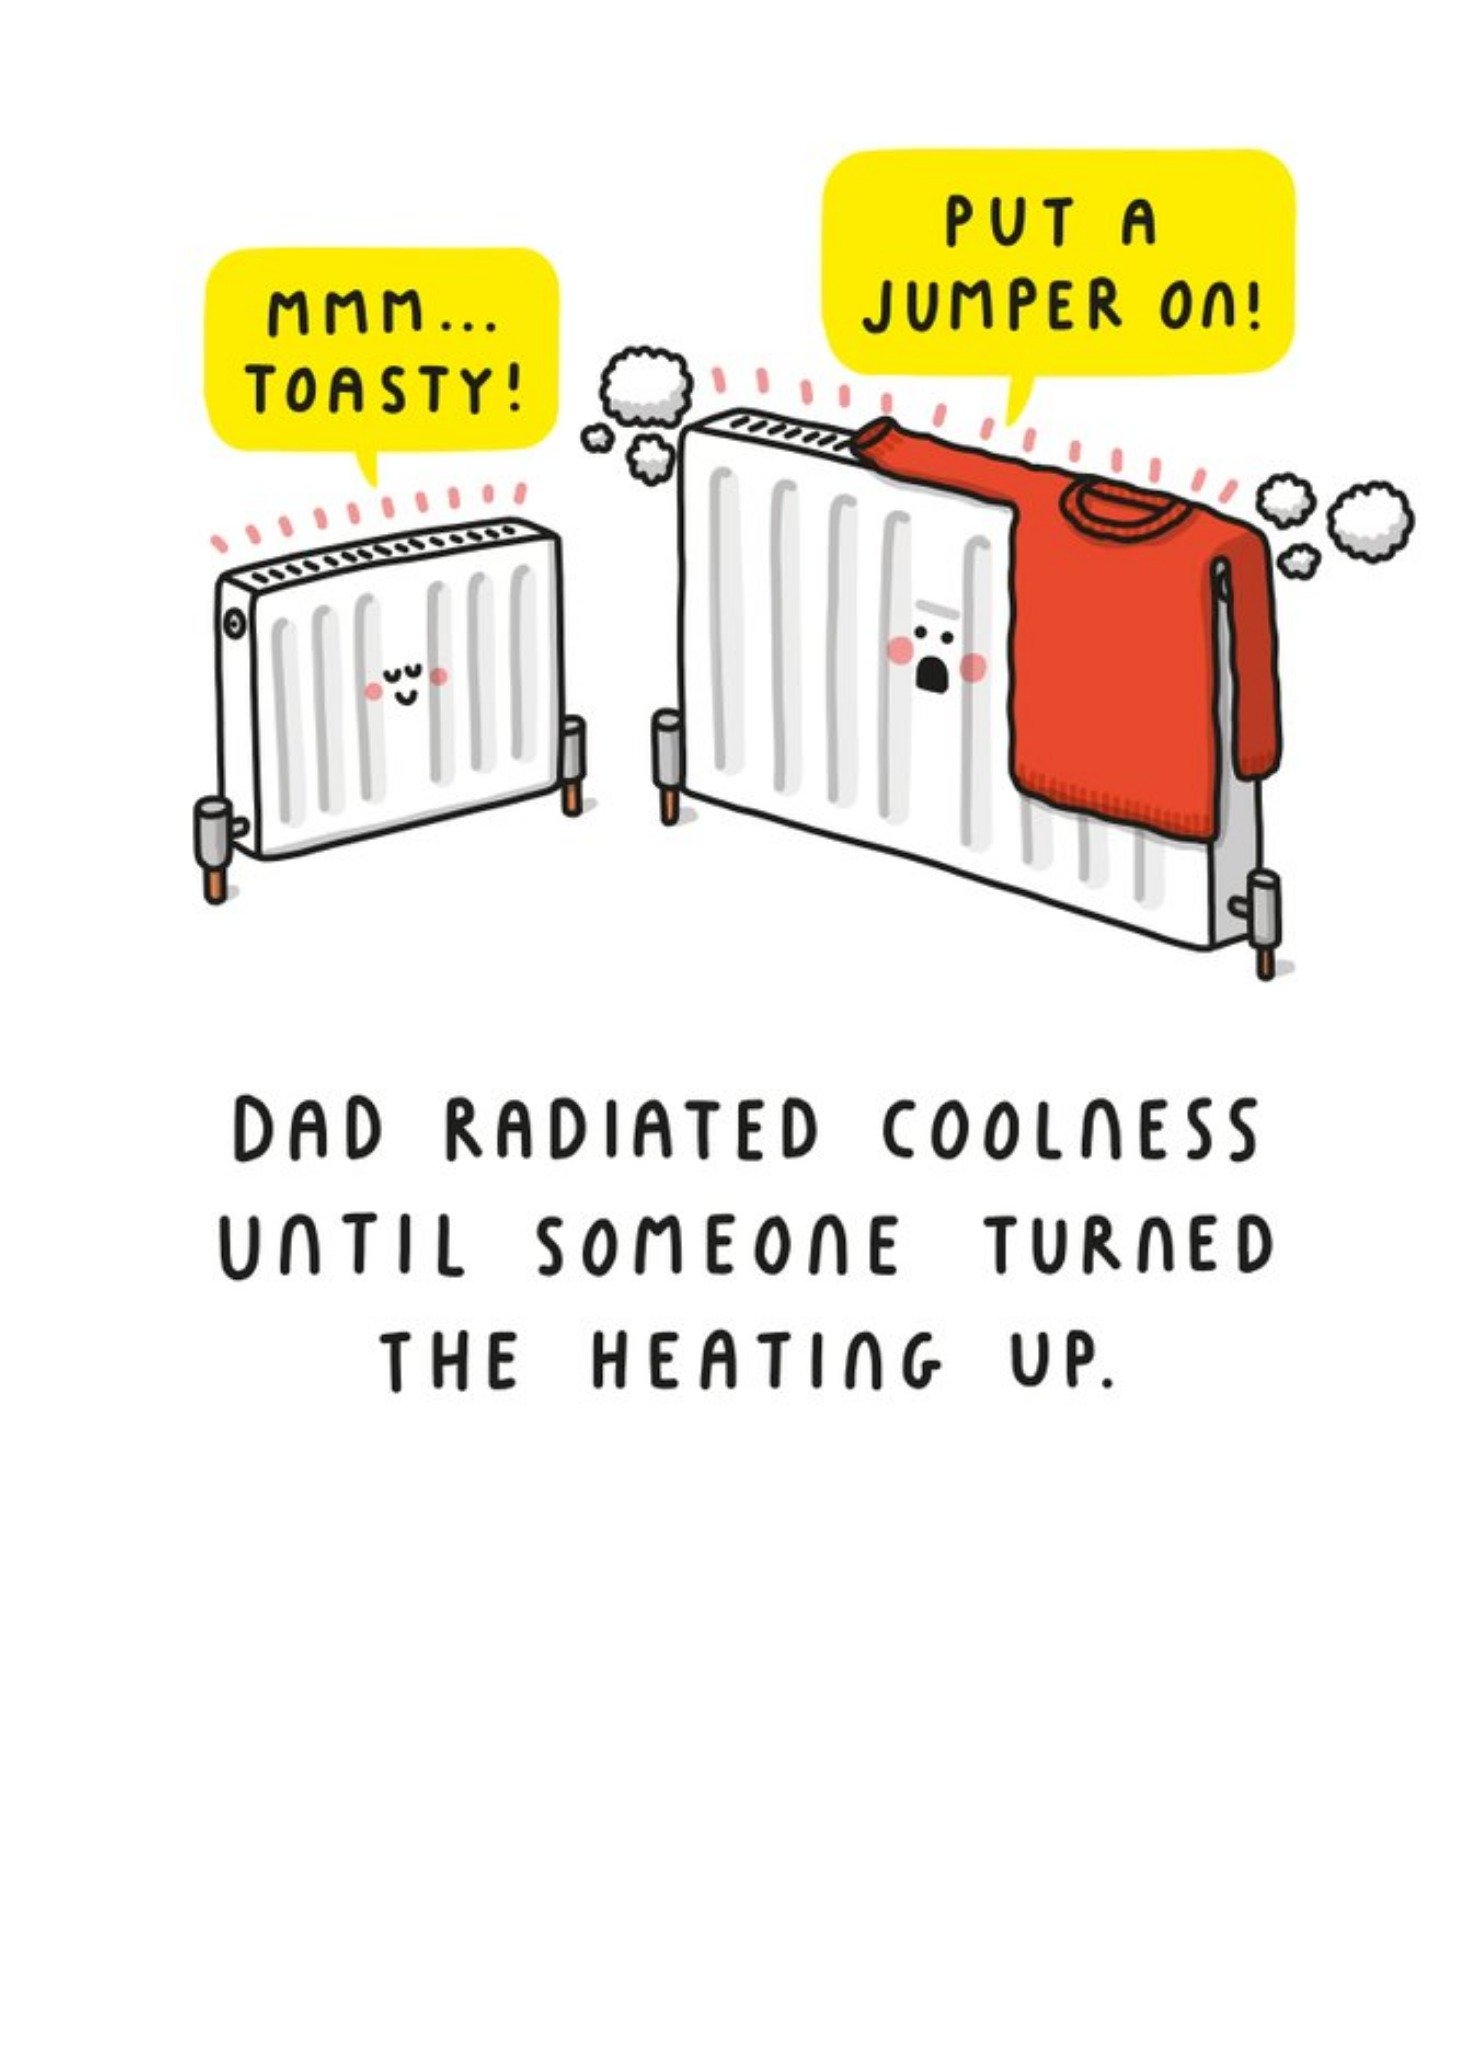 Moonpig Mungo And Shoddy Mmm Toasty Put A Jumper On Dad Radiated Coolness Fathers Day Card, Large